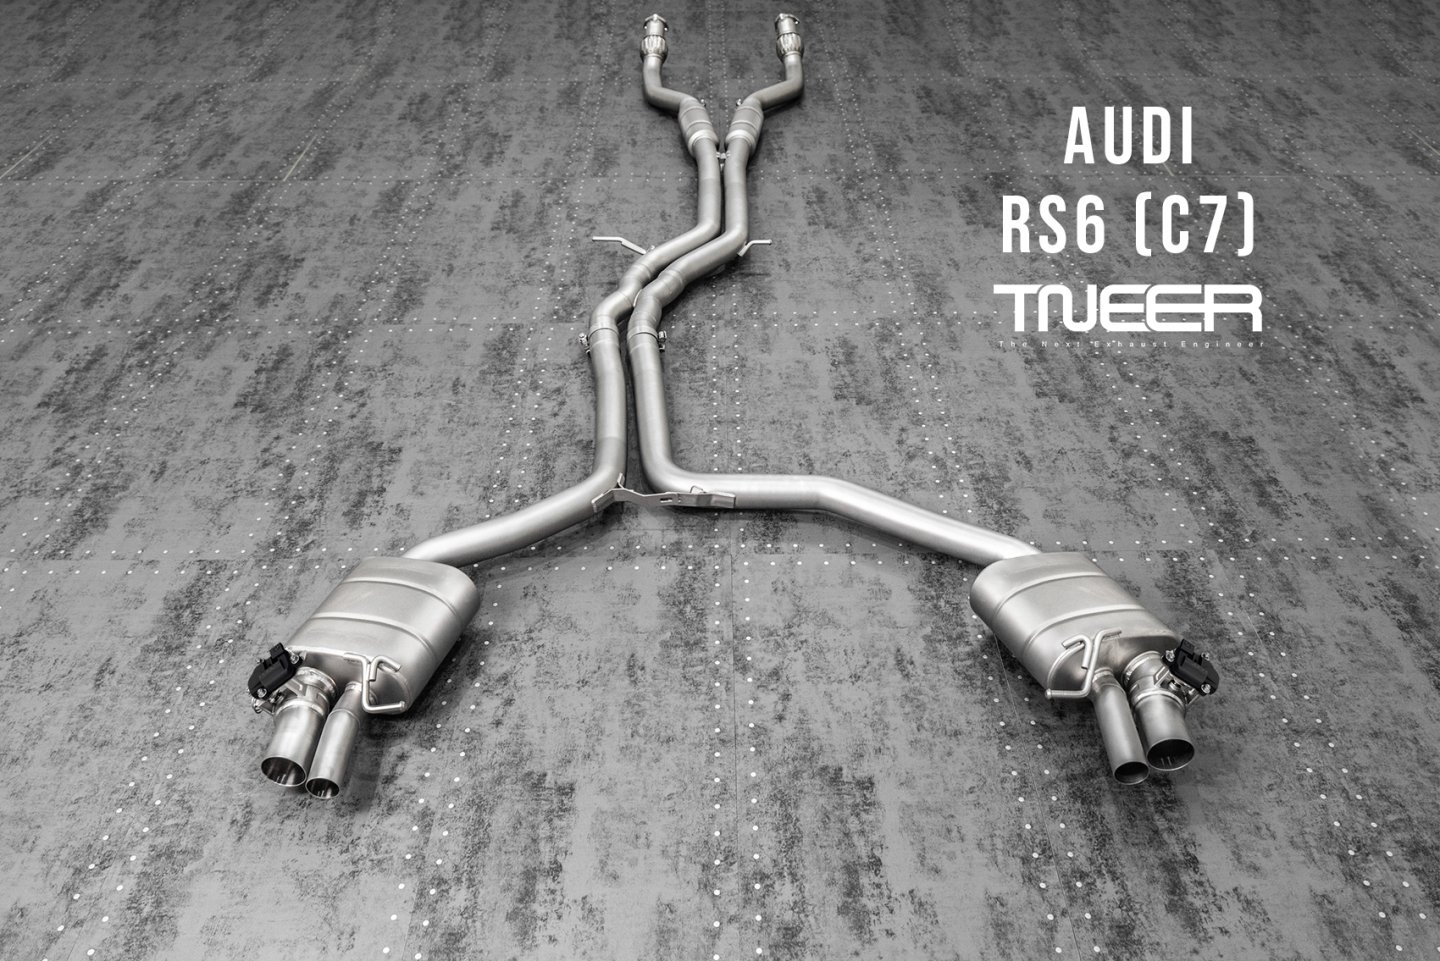 Audi RS3 (8V.1) Sportback 2.5 TFSI TNEER Exhaust System with TACS and Hand Crafted Dual Silver Tips